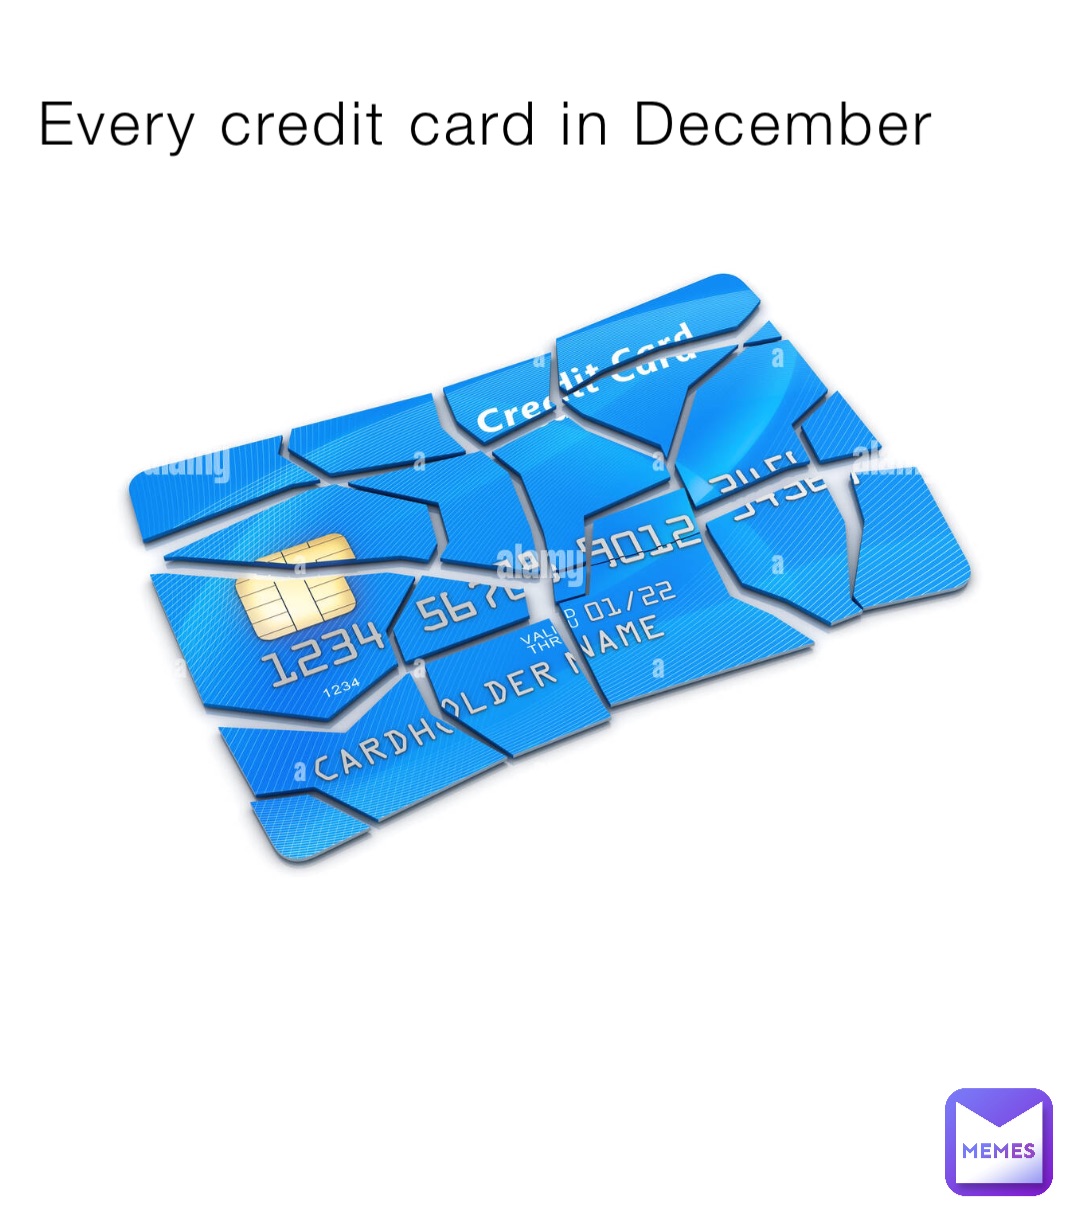 Every credit card in December